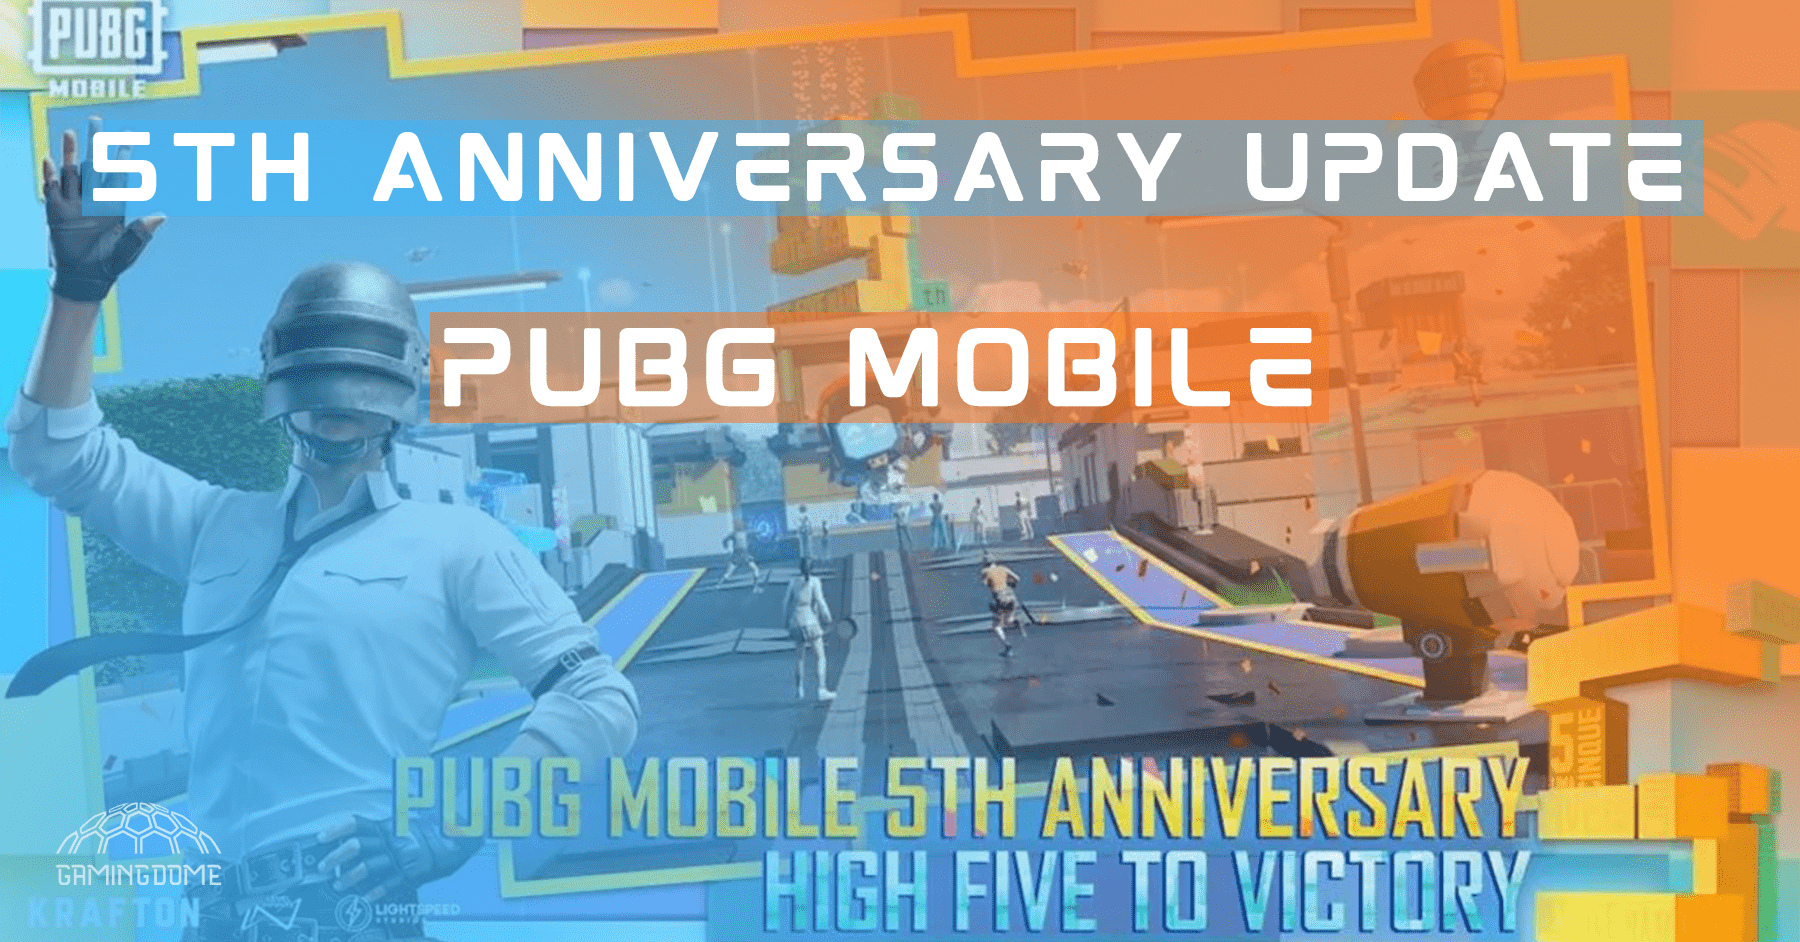 PUBG MOBILE'S 5TH ANNIVERSARY UPDATE: WORLD OF WONDER AND MORE